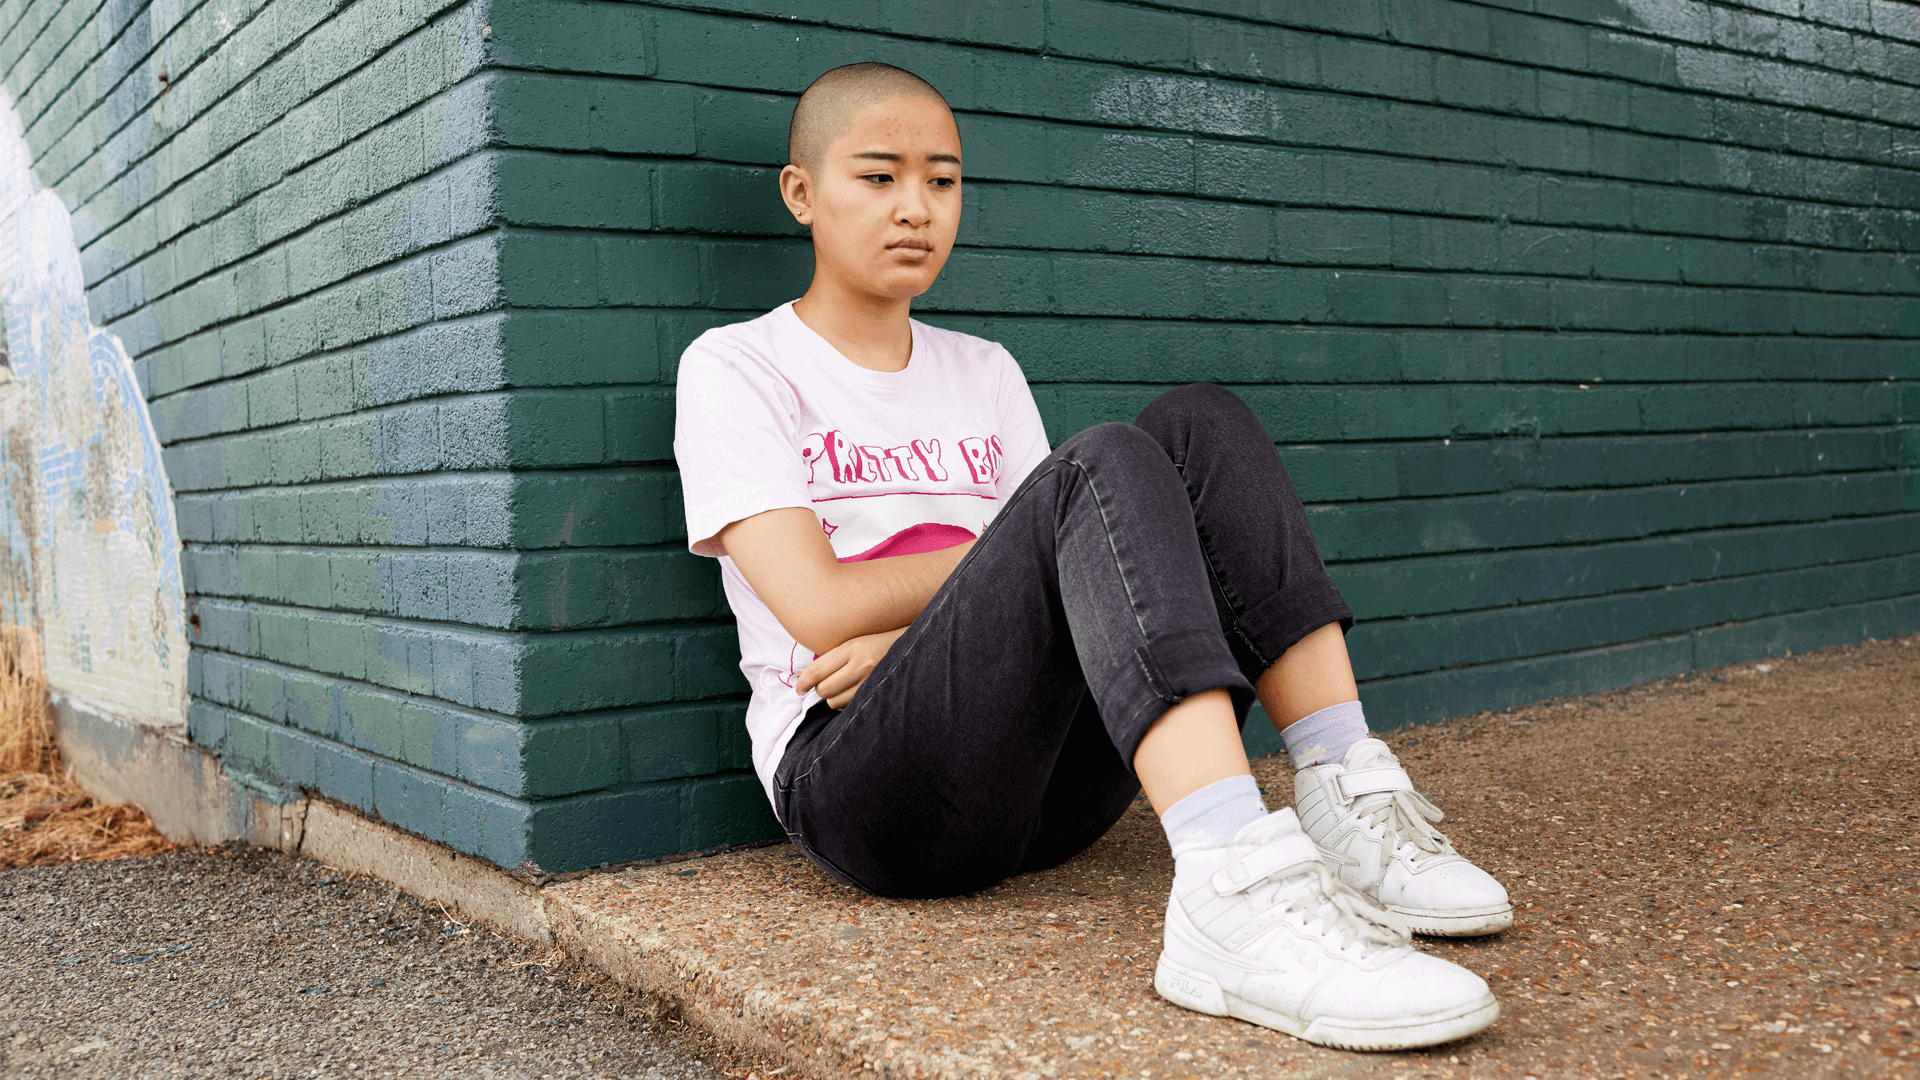 A girl with a shaved head wearing a t-shirt and black jeans. She is sitting on the ground and leaning against a green brick wall.